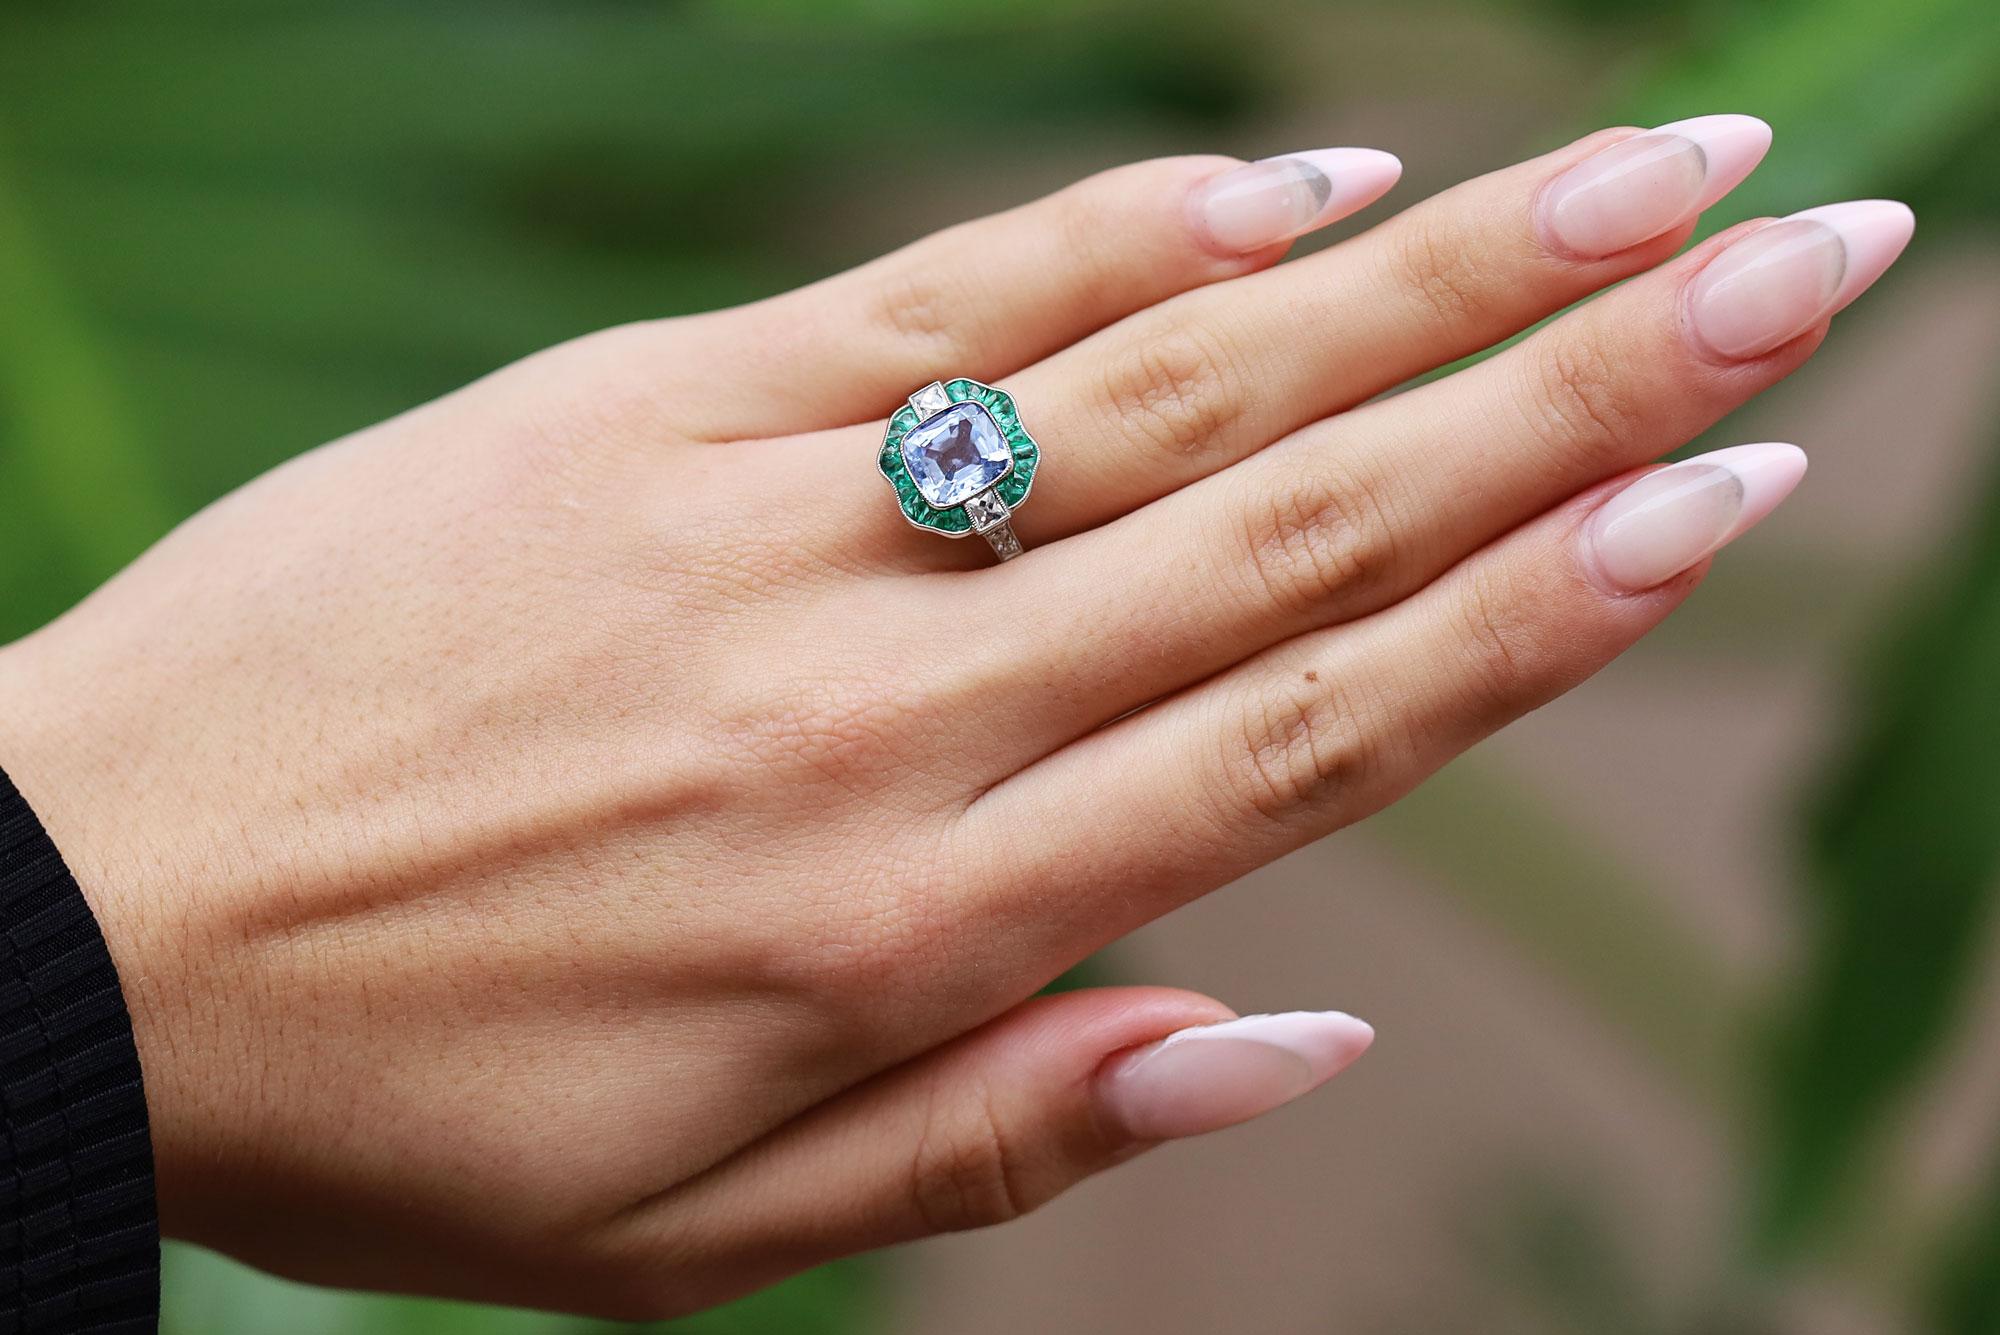 An incredible and rare unheated Ceylon sapphire is the center of attention of this gorgeous multi-gemstone ring. The Calibré emeralds hug the border of the spectacular cornflower blue sapphire and delivers a truly appealing color combination. Old